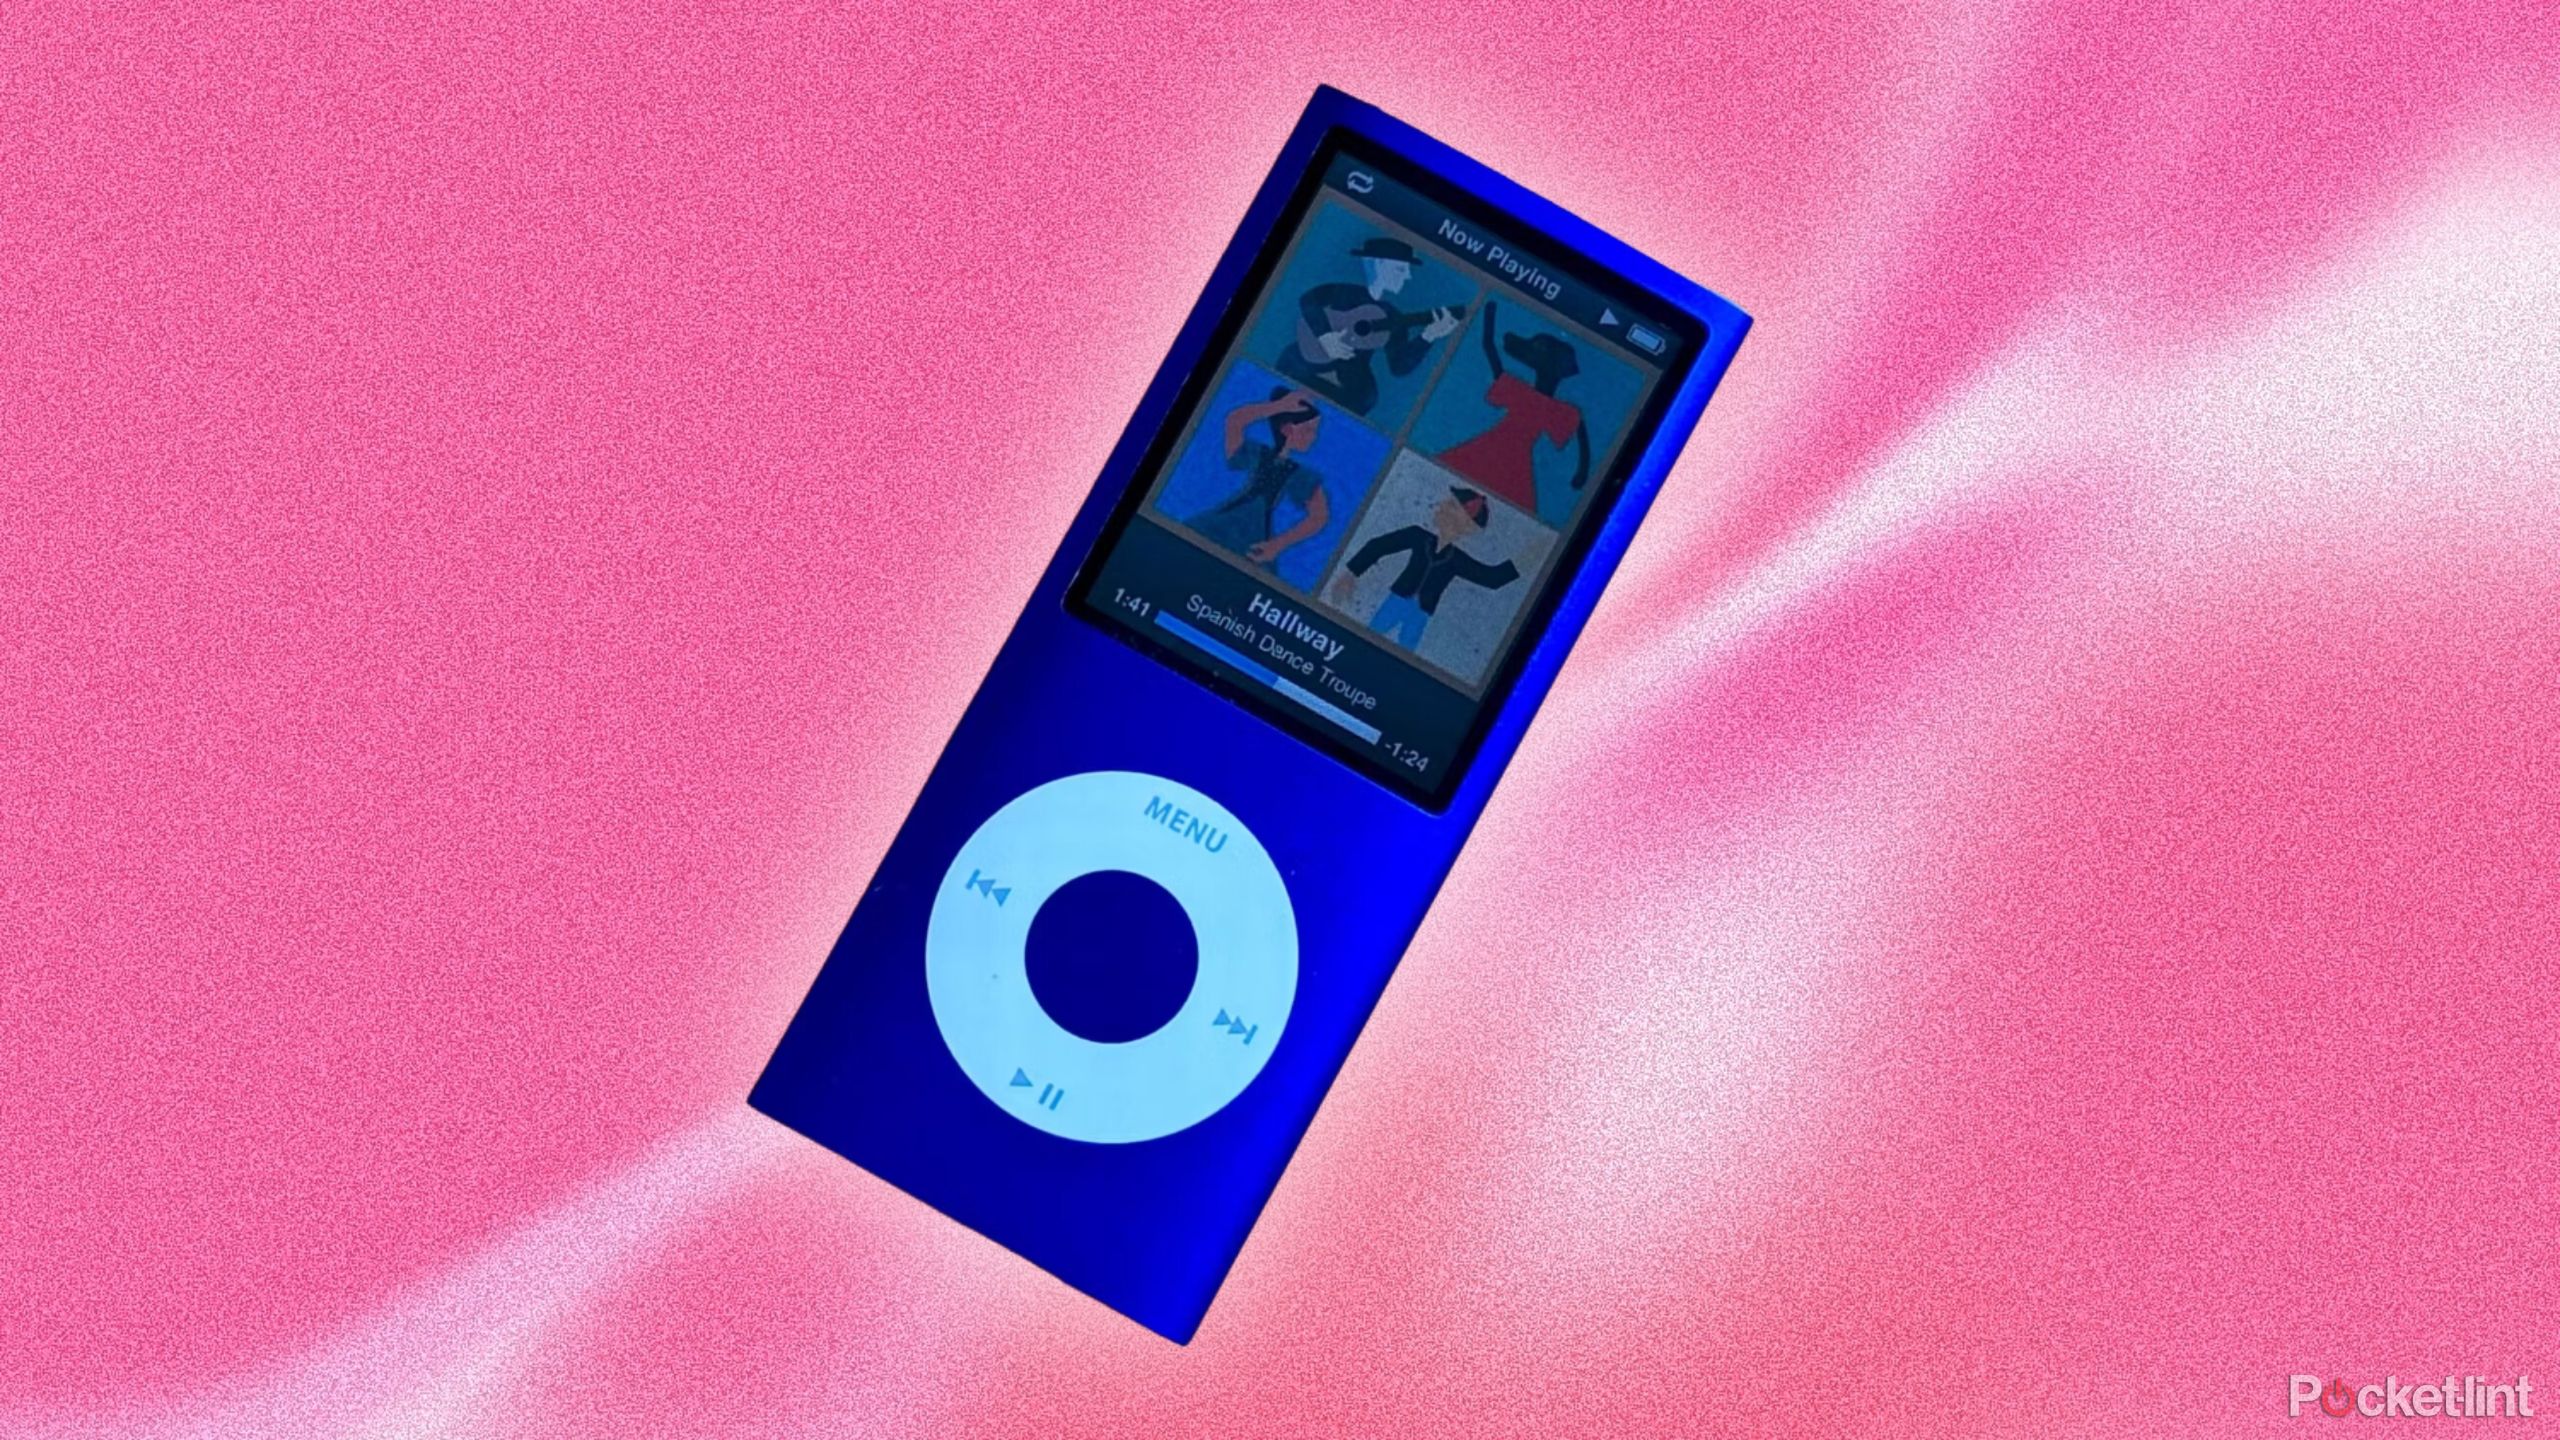 iPod nano against a pink background